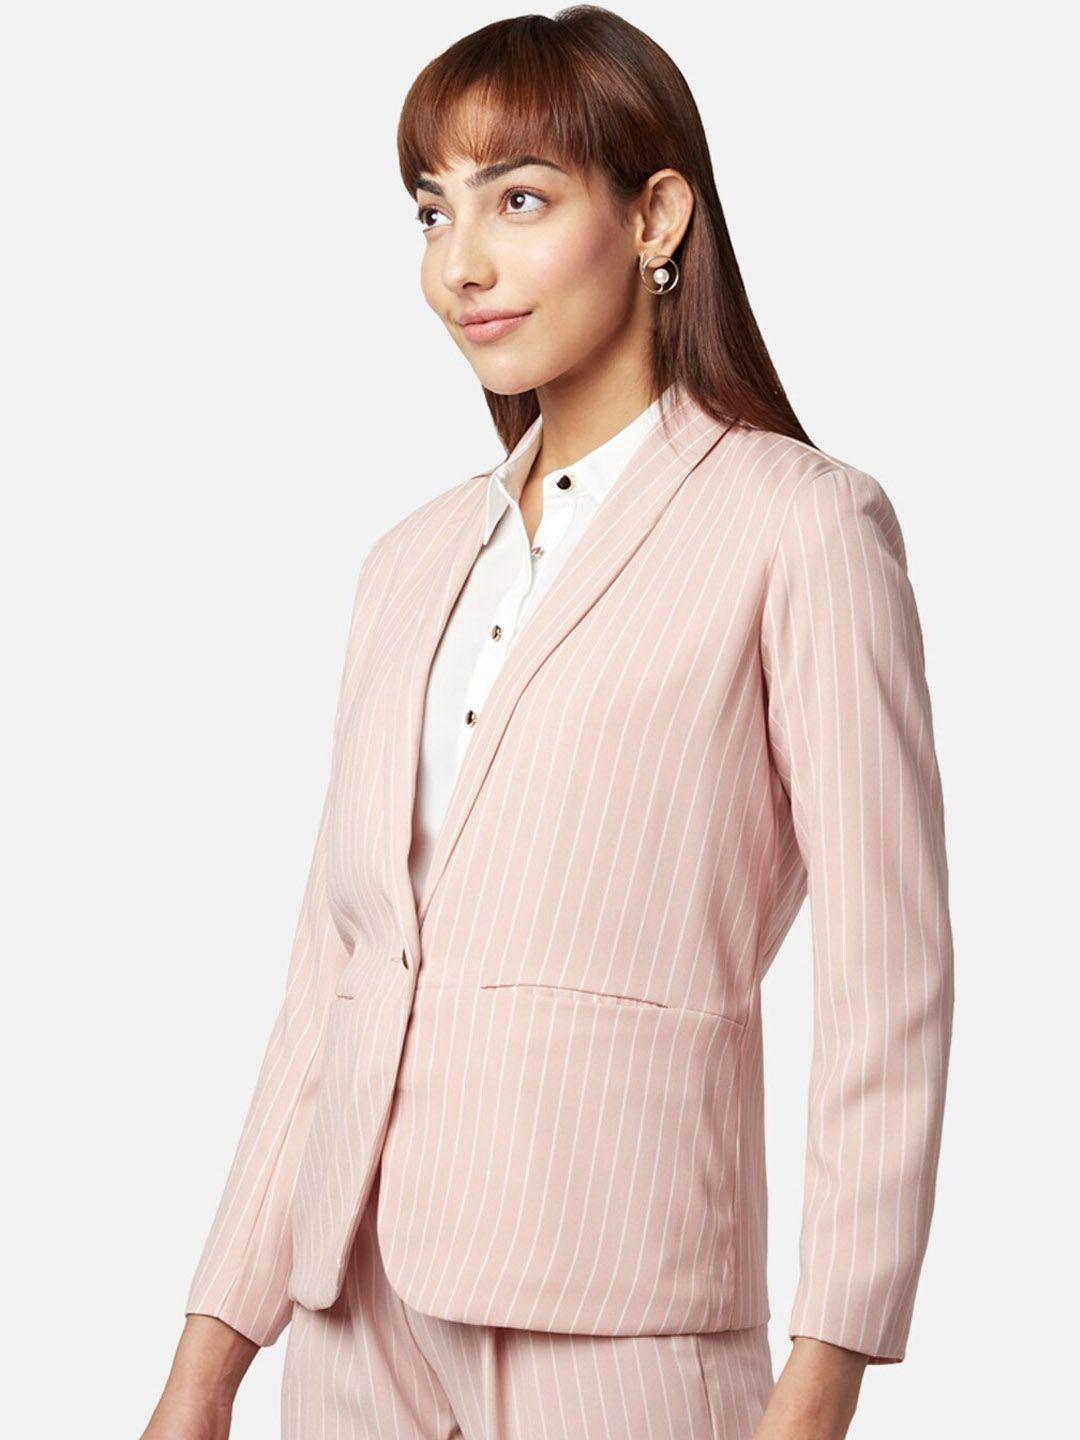 annabelle by pantaloons women striped single-breasted blazer